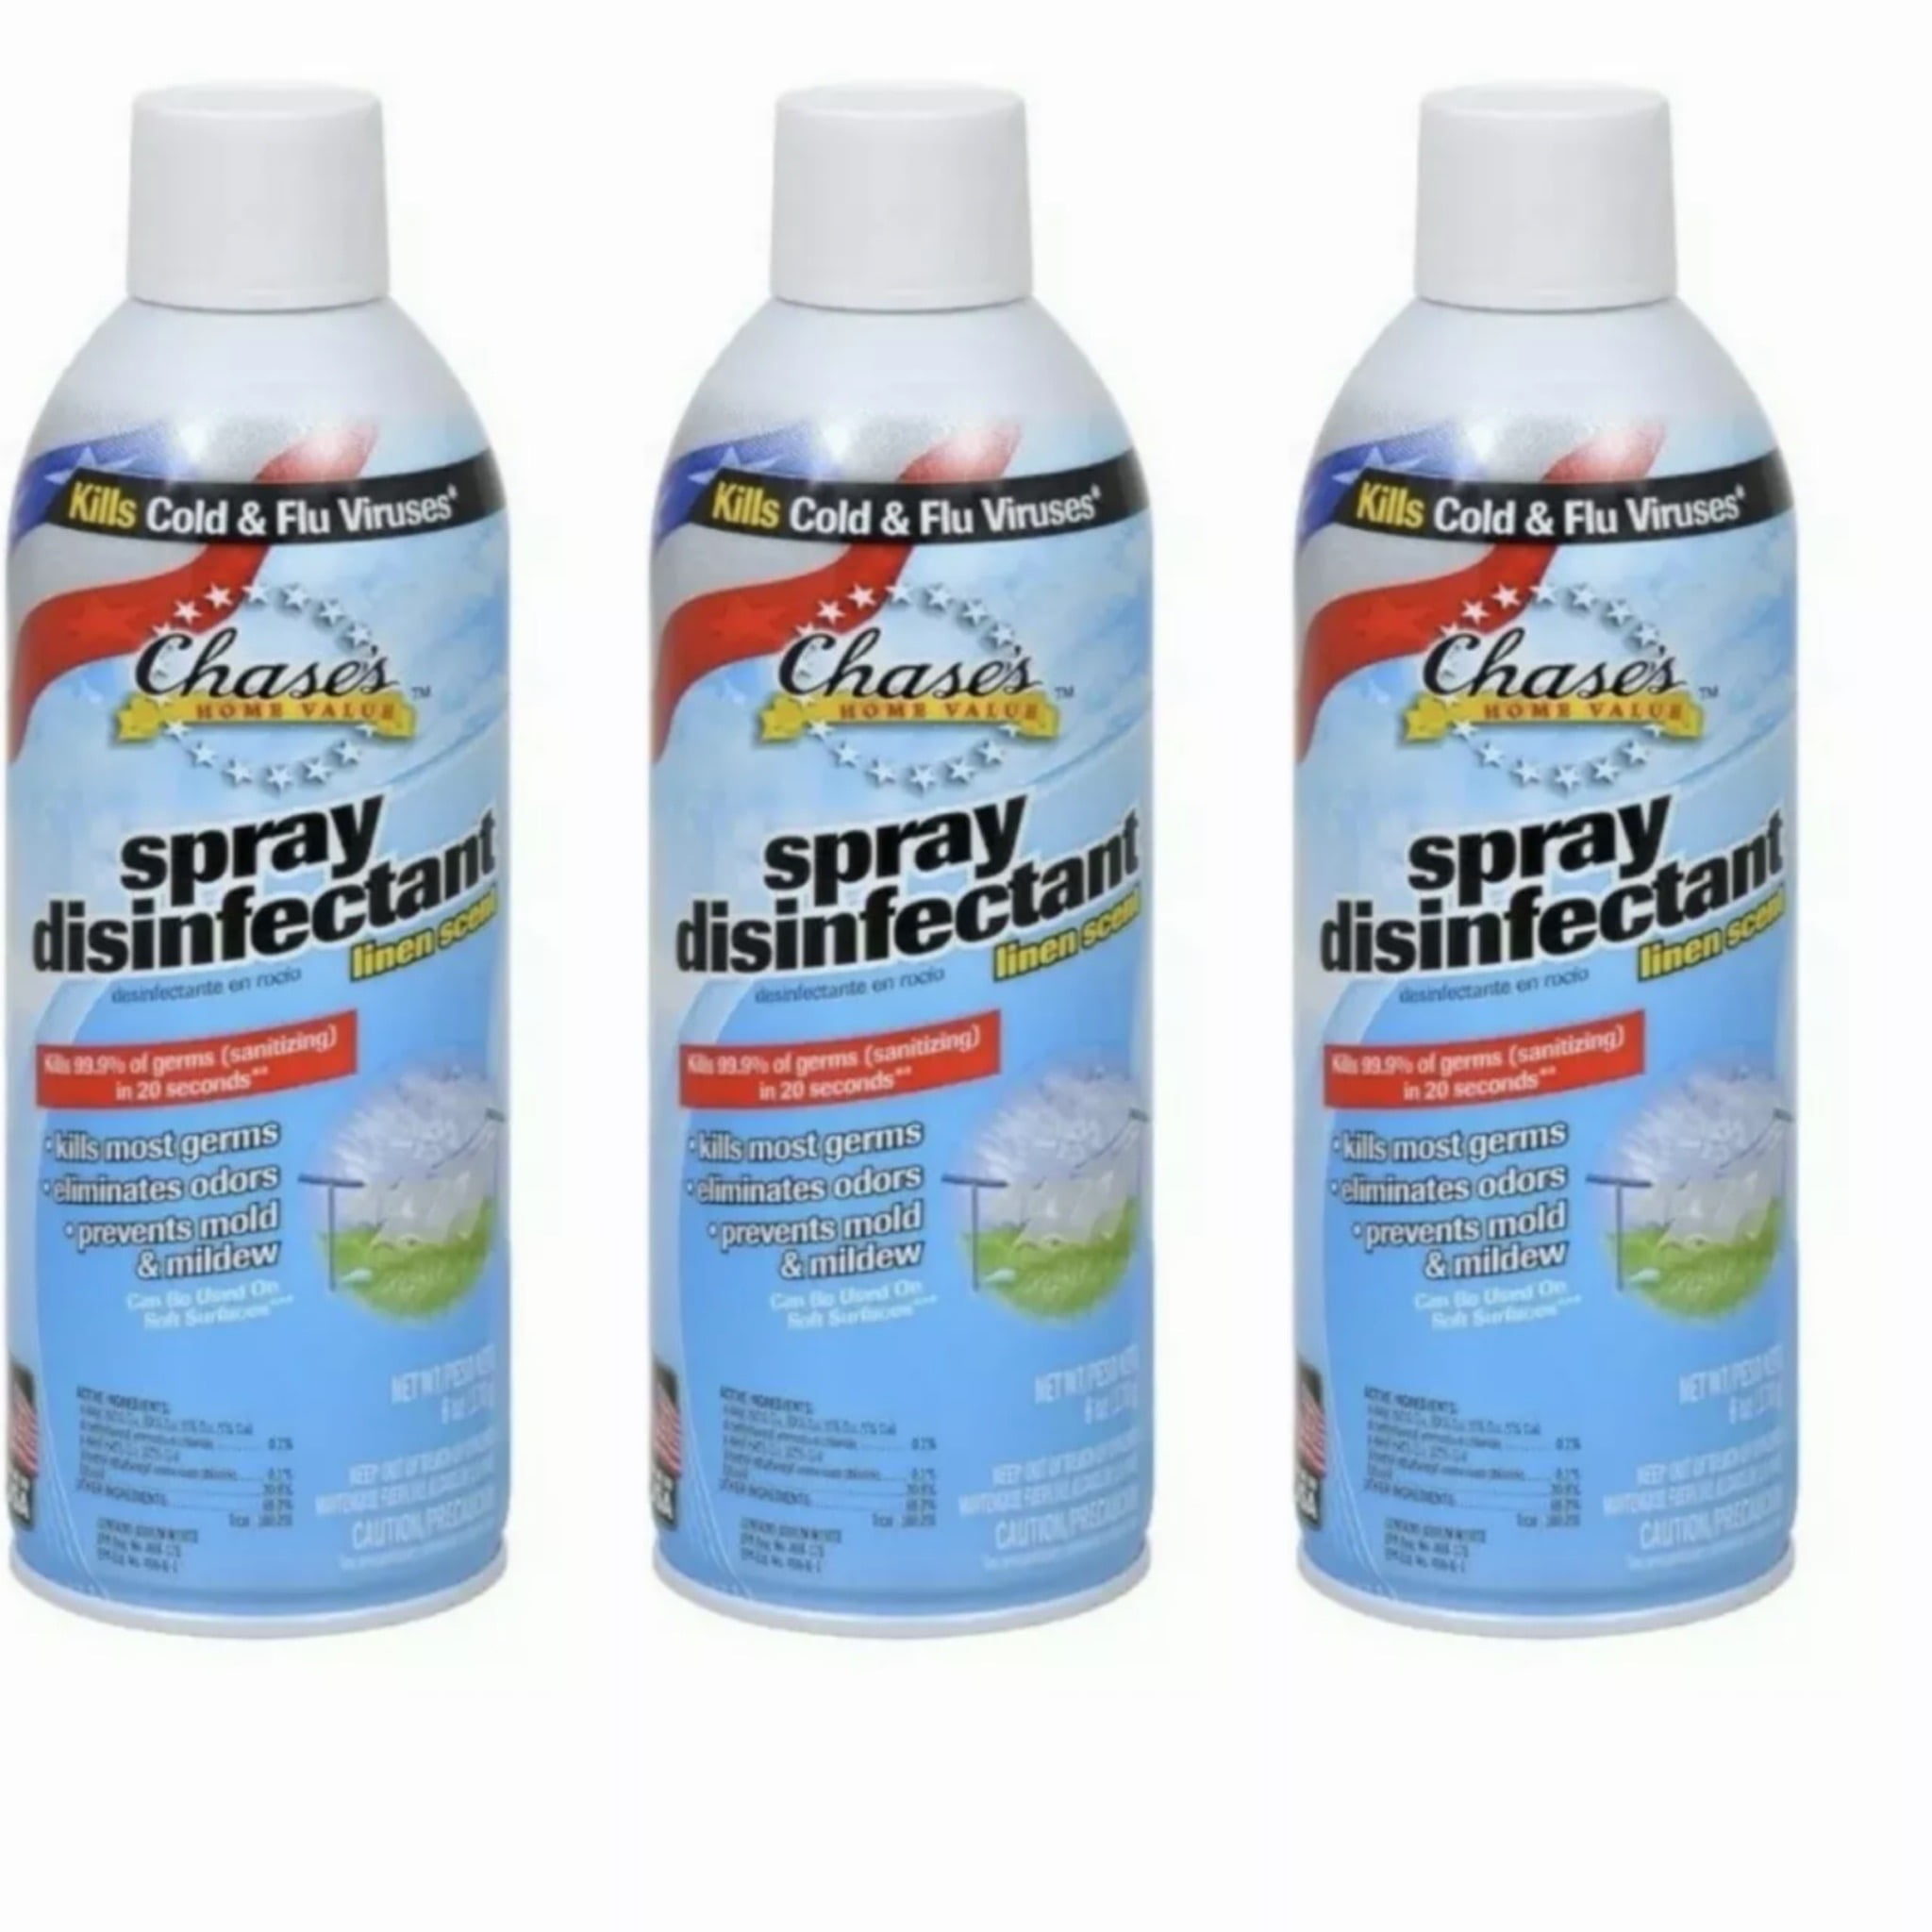 3 Chase Home Value Disinfectant Spray Linen Scent Or Country Scent Product Packaging May Differ 6 Oz Each Walmart Com Walmart Com